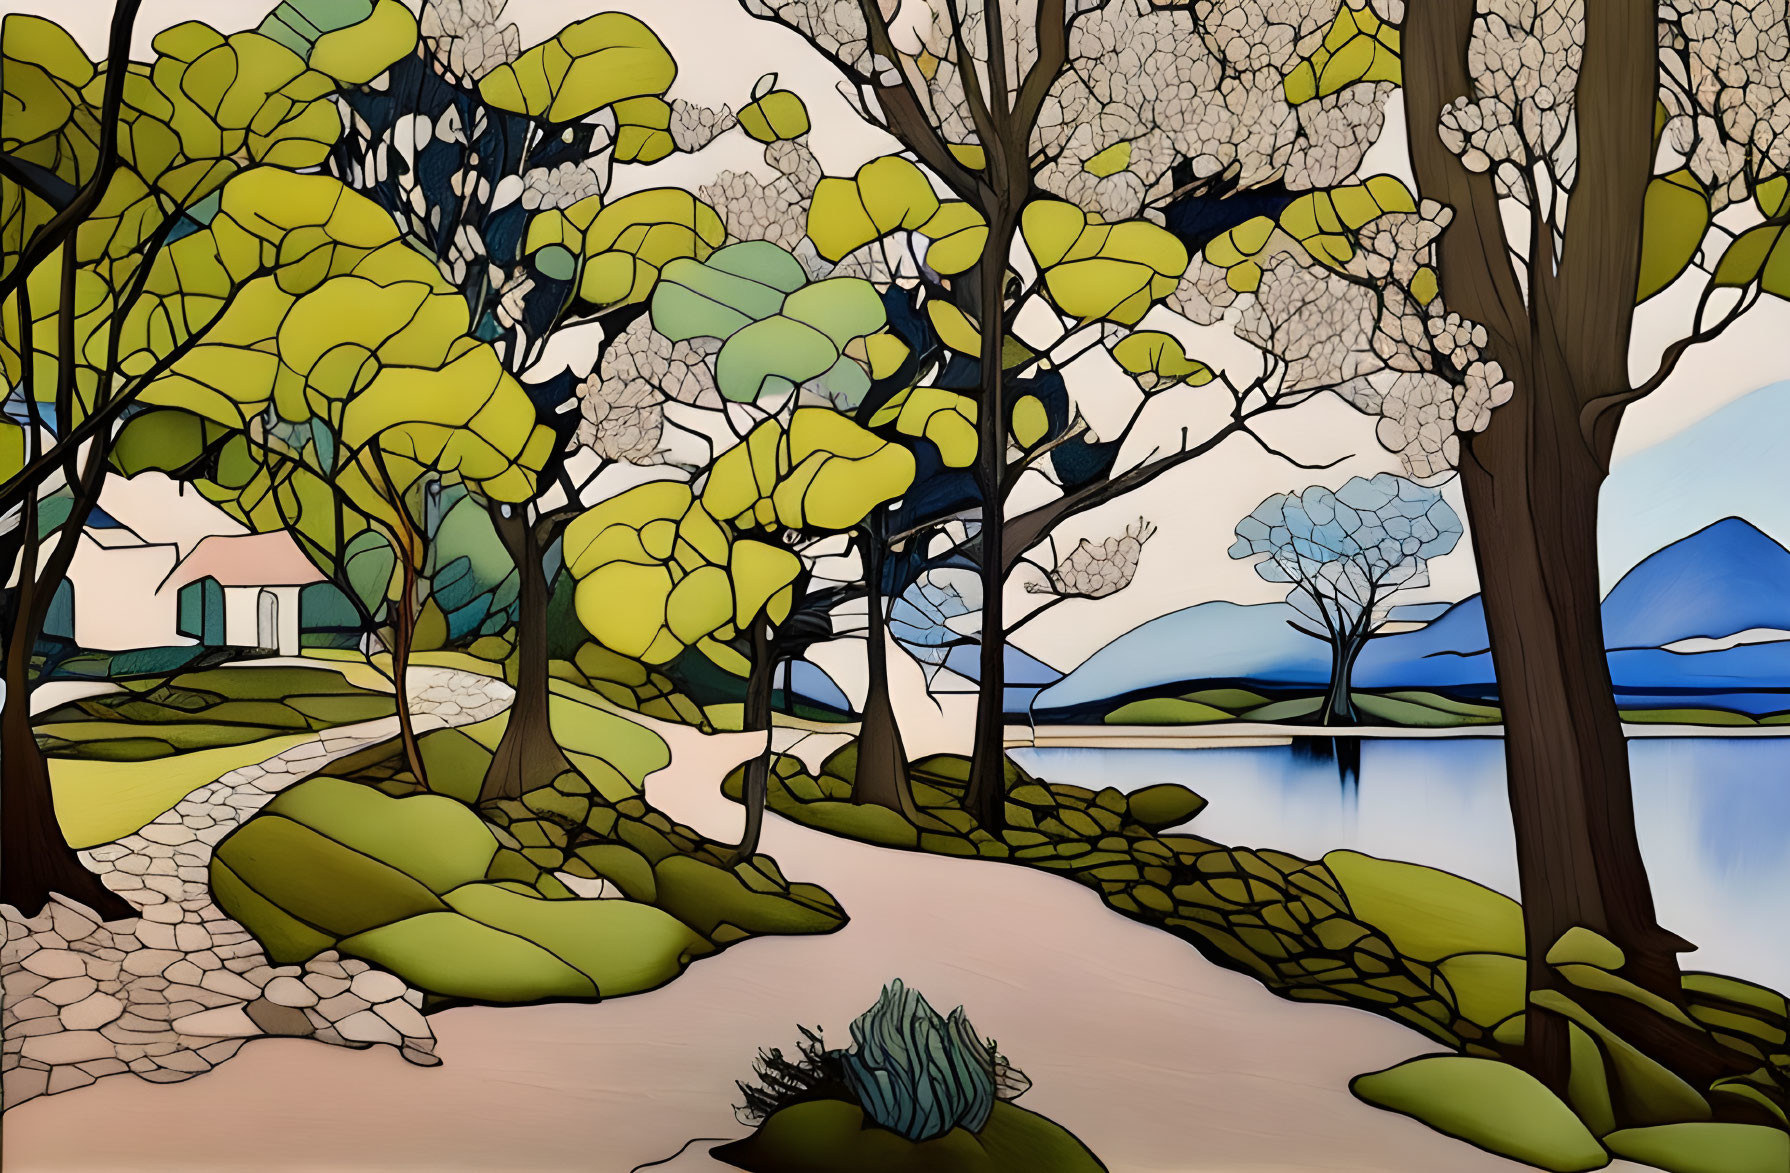 Colorful Trees & Cottage by the Lake: Stylized Artwork of Tranquil Scene